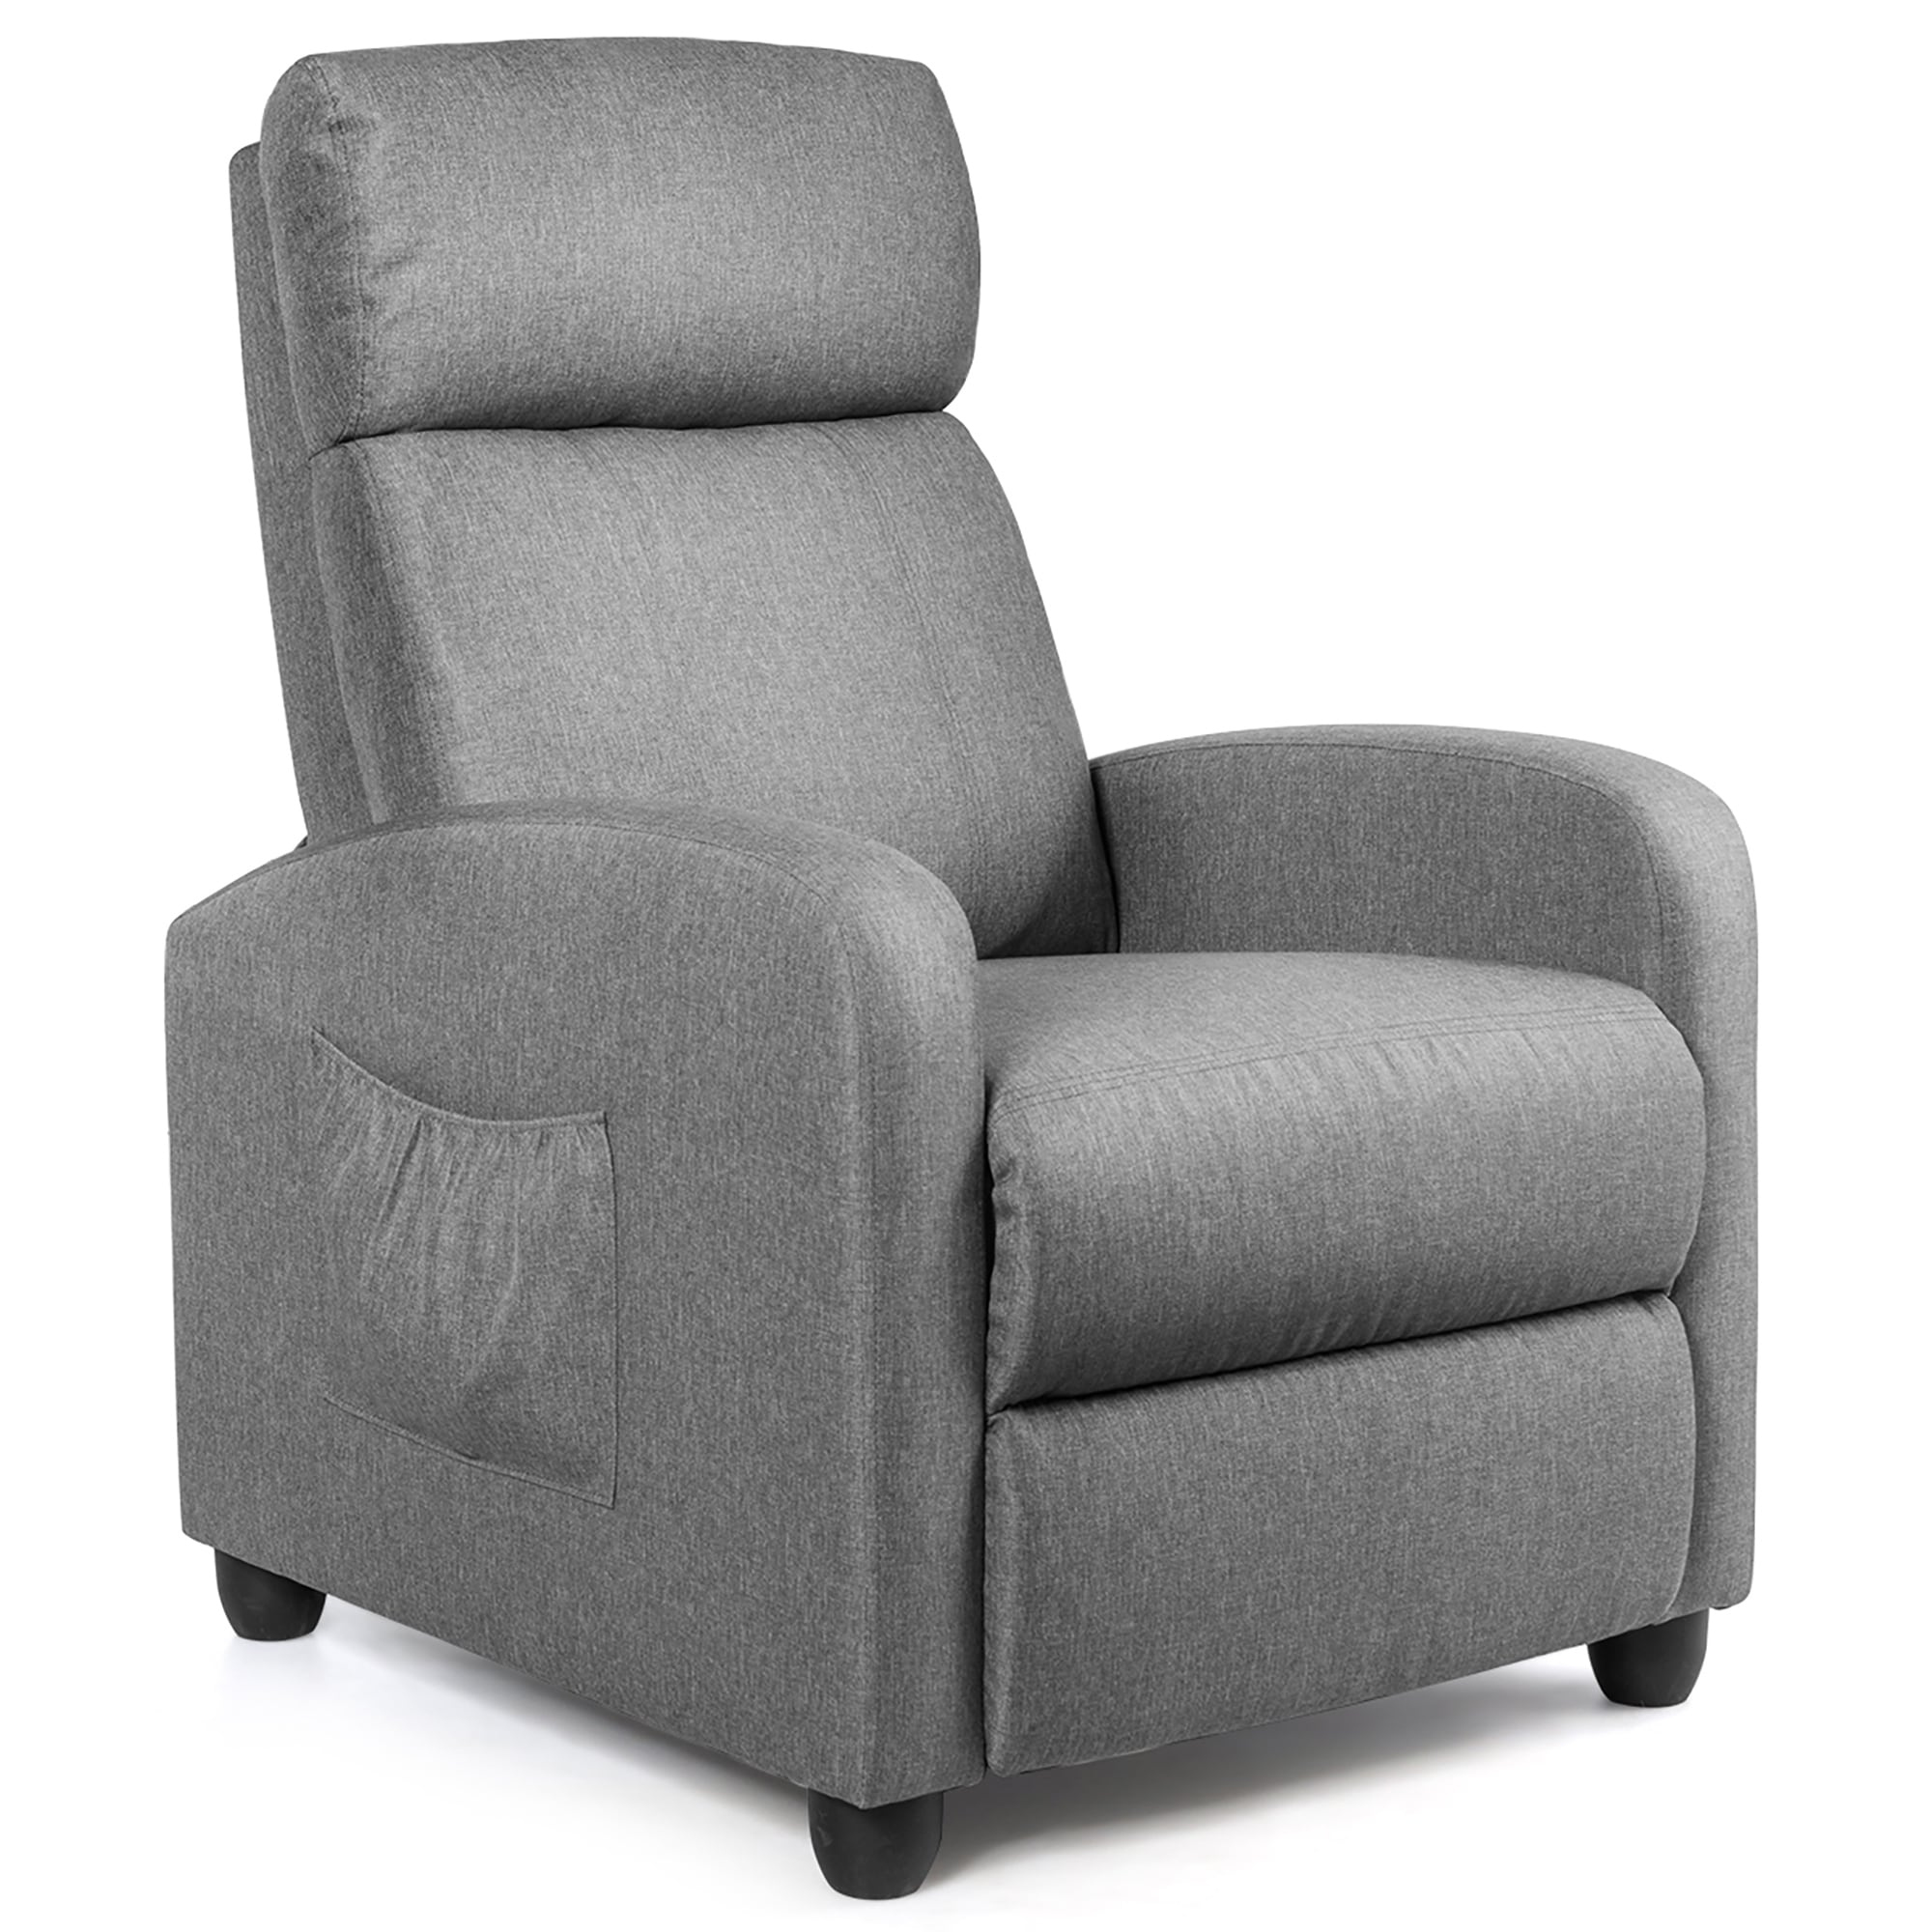 https://ak1.ostkcdn.com/images/products/is/images/direct/865ecd0e358befa0281294ee9099f257aa1736c2/Recliner-Massage-Sofa-Chair-Fabric-Reclining-Chair.jpg